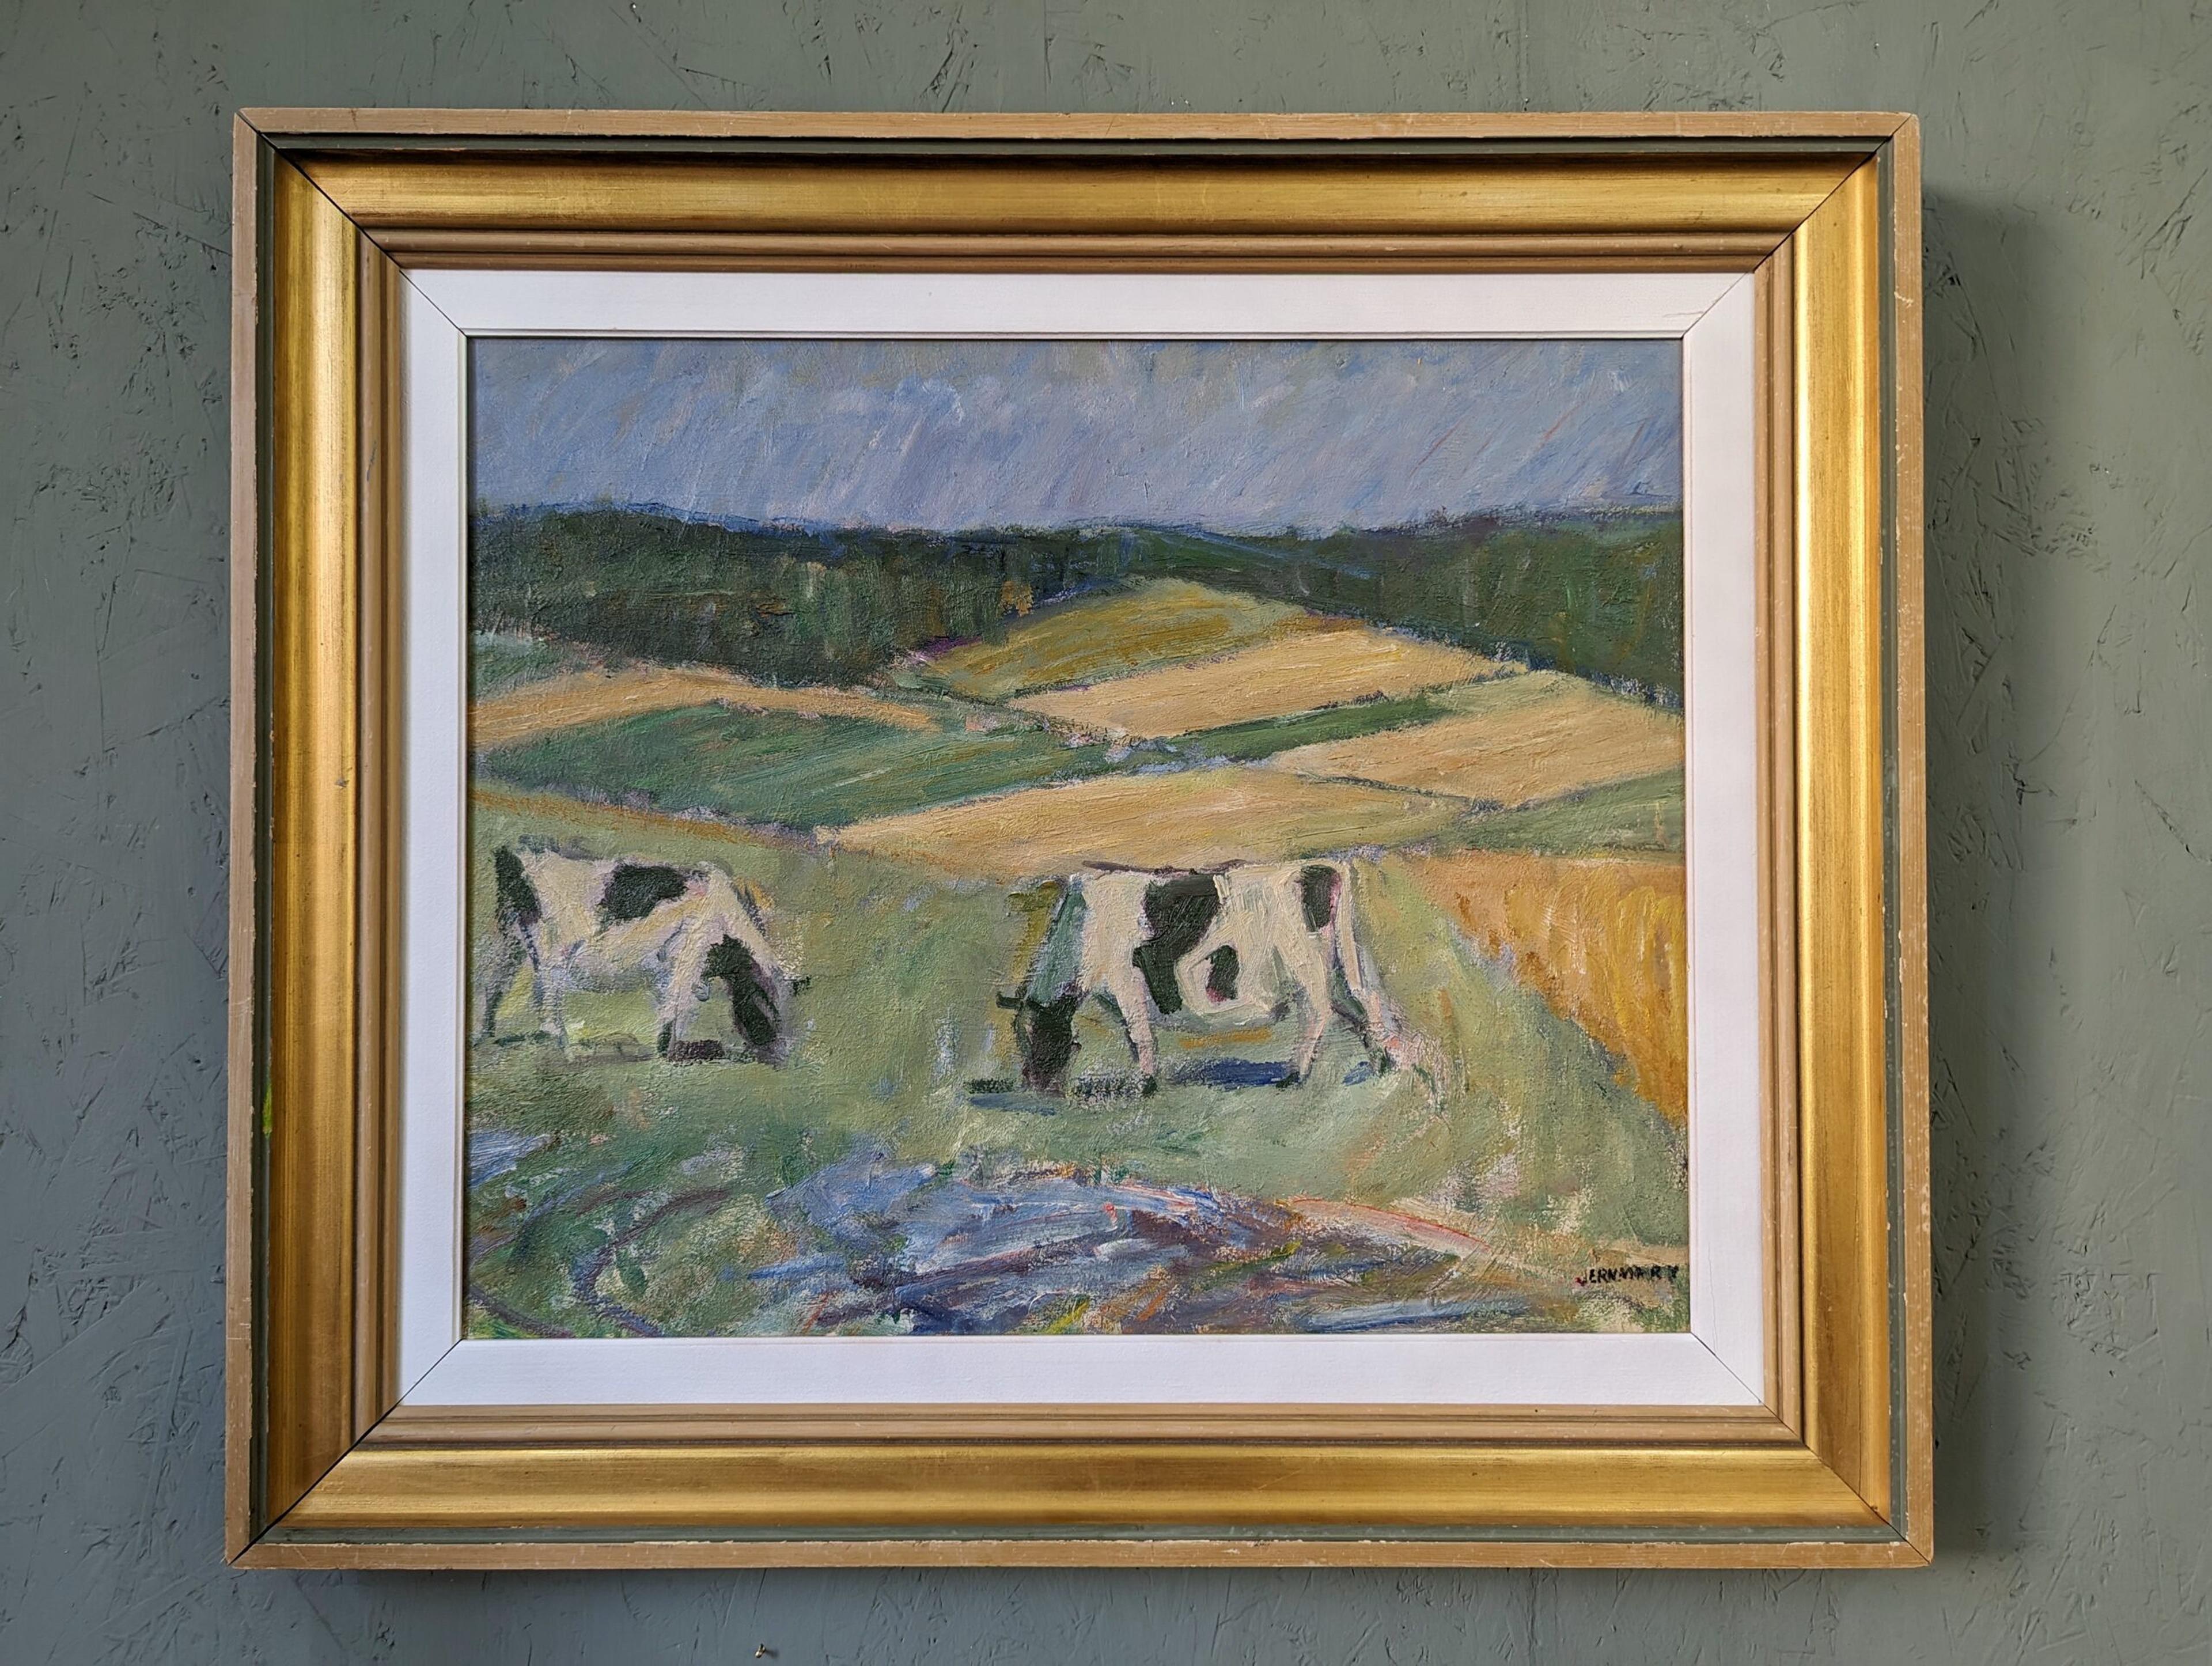 PASTURE COWS
Size:  61 x 71 cm (including frame)
Oil on Board

A soothing and very well-executed modernist mid-century landscape painting, executed in oil onto board.

This landscape composition depicts a panoramic view of a 2 cows grazing in a vast